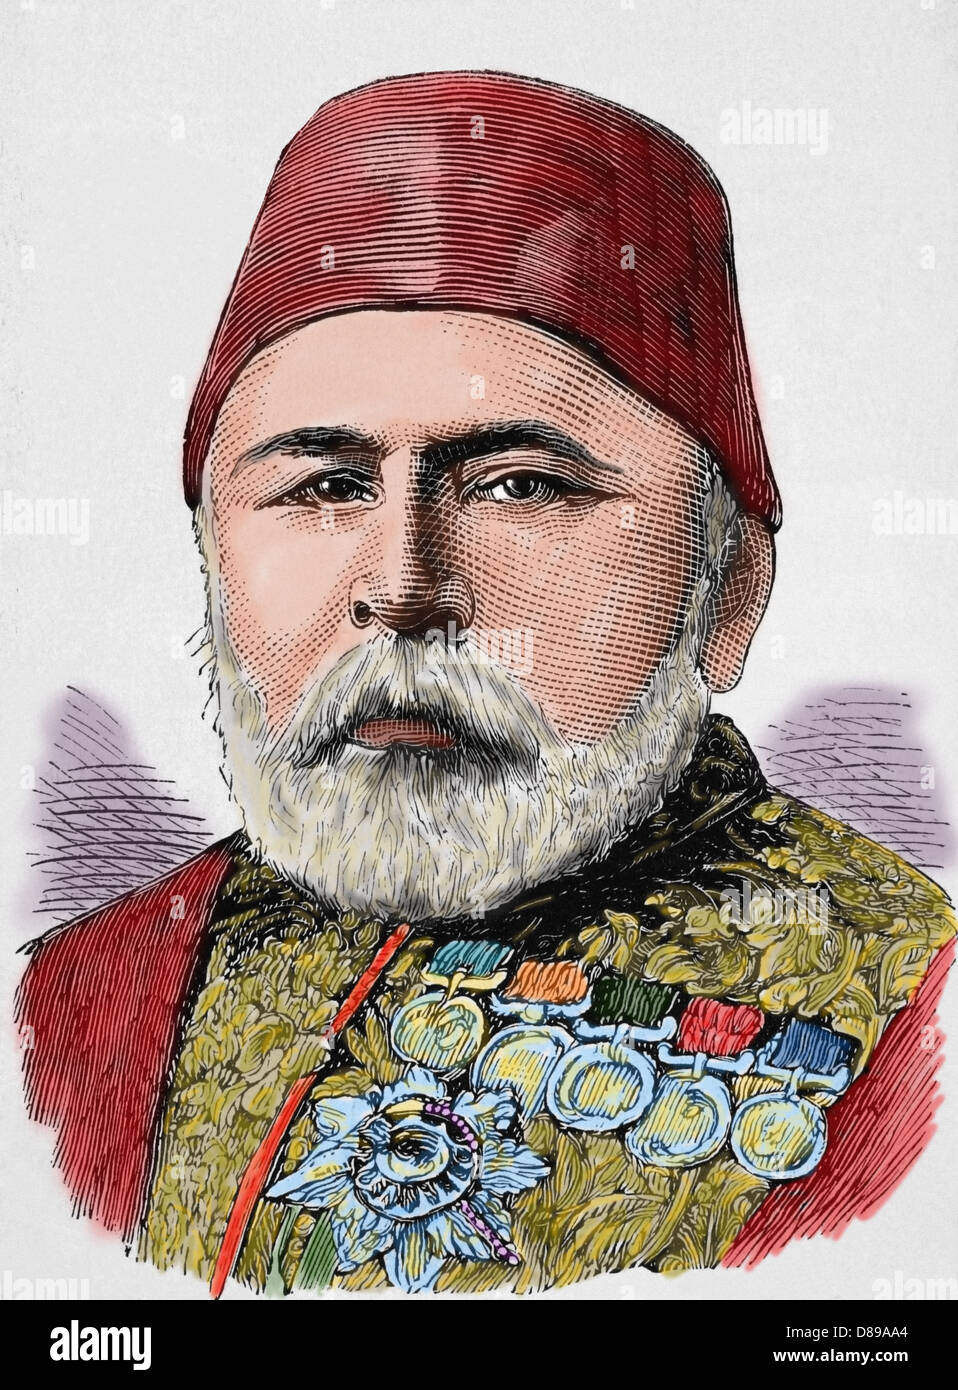 Hussein Awni pasha (1819 1876). Was a Turkish general and statesman. Engraving by Rico. Colored. Stock Photo